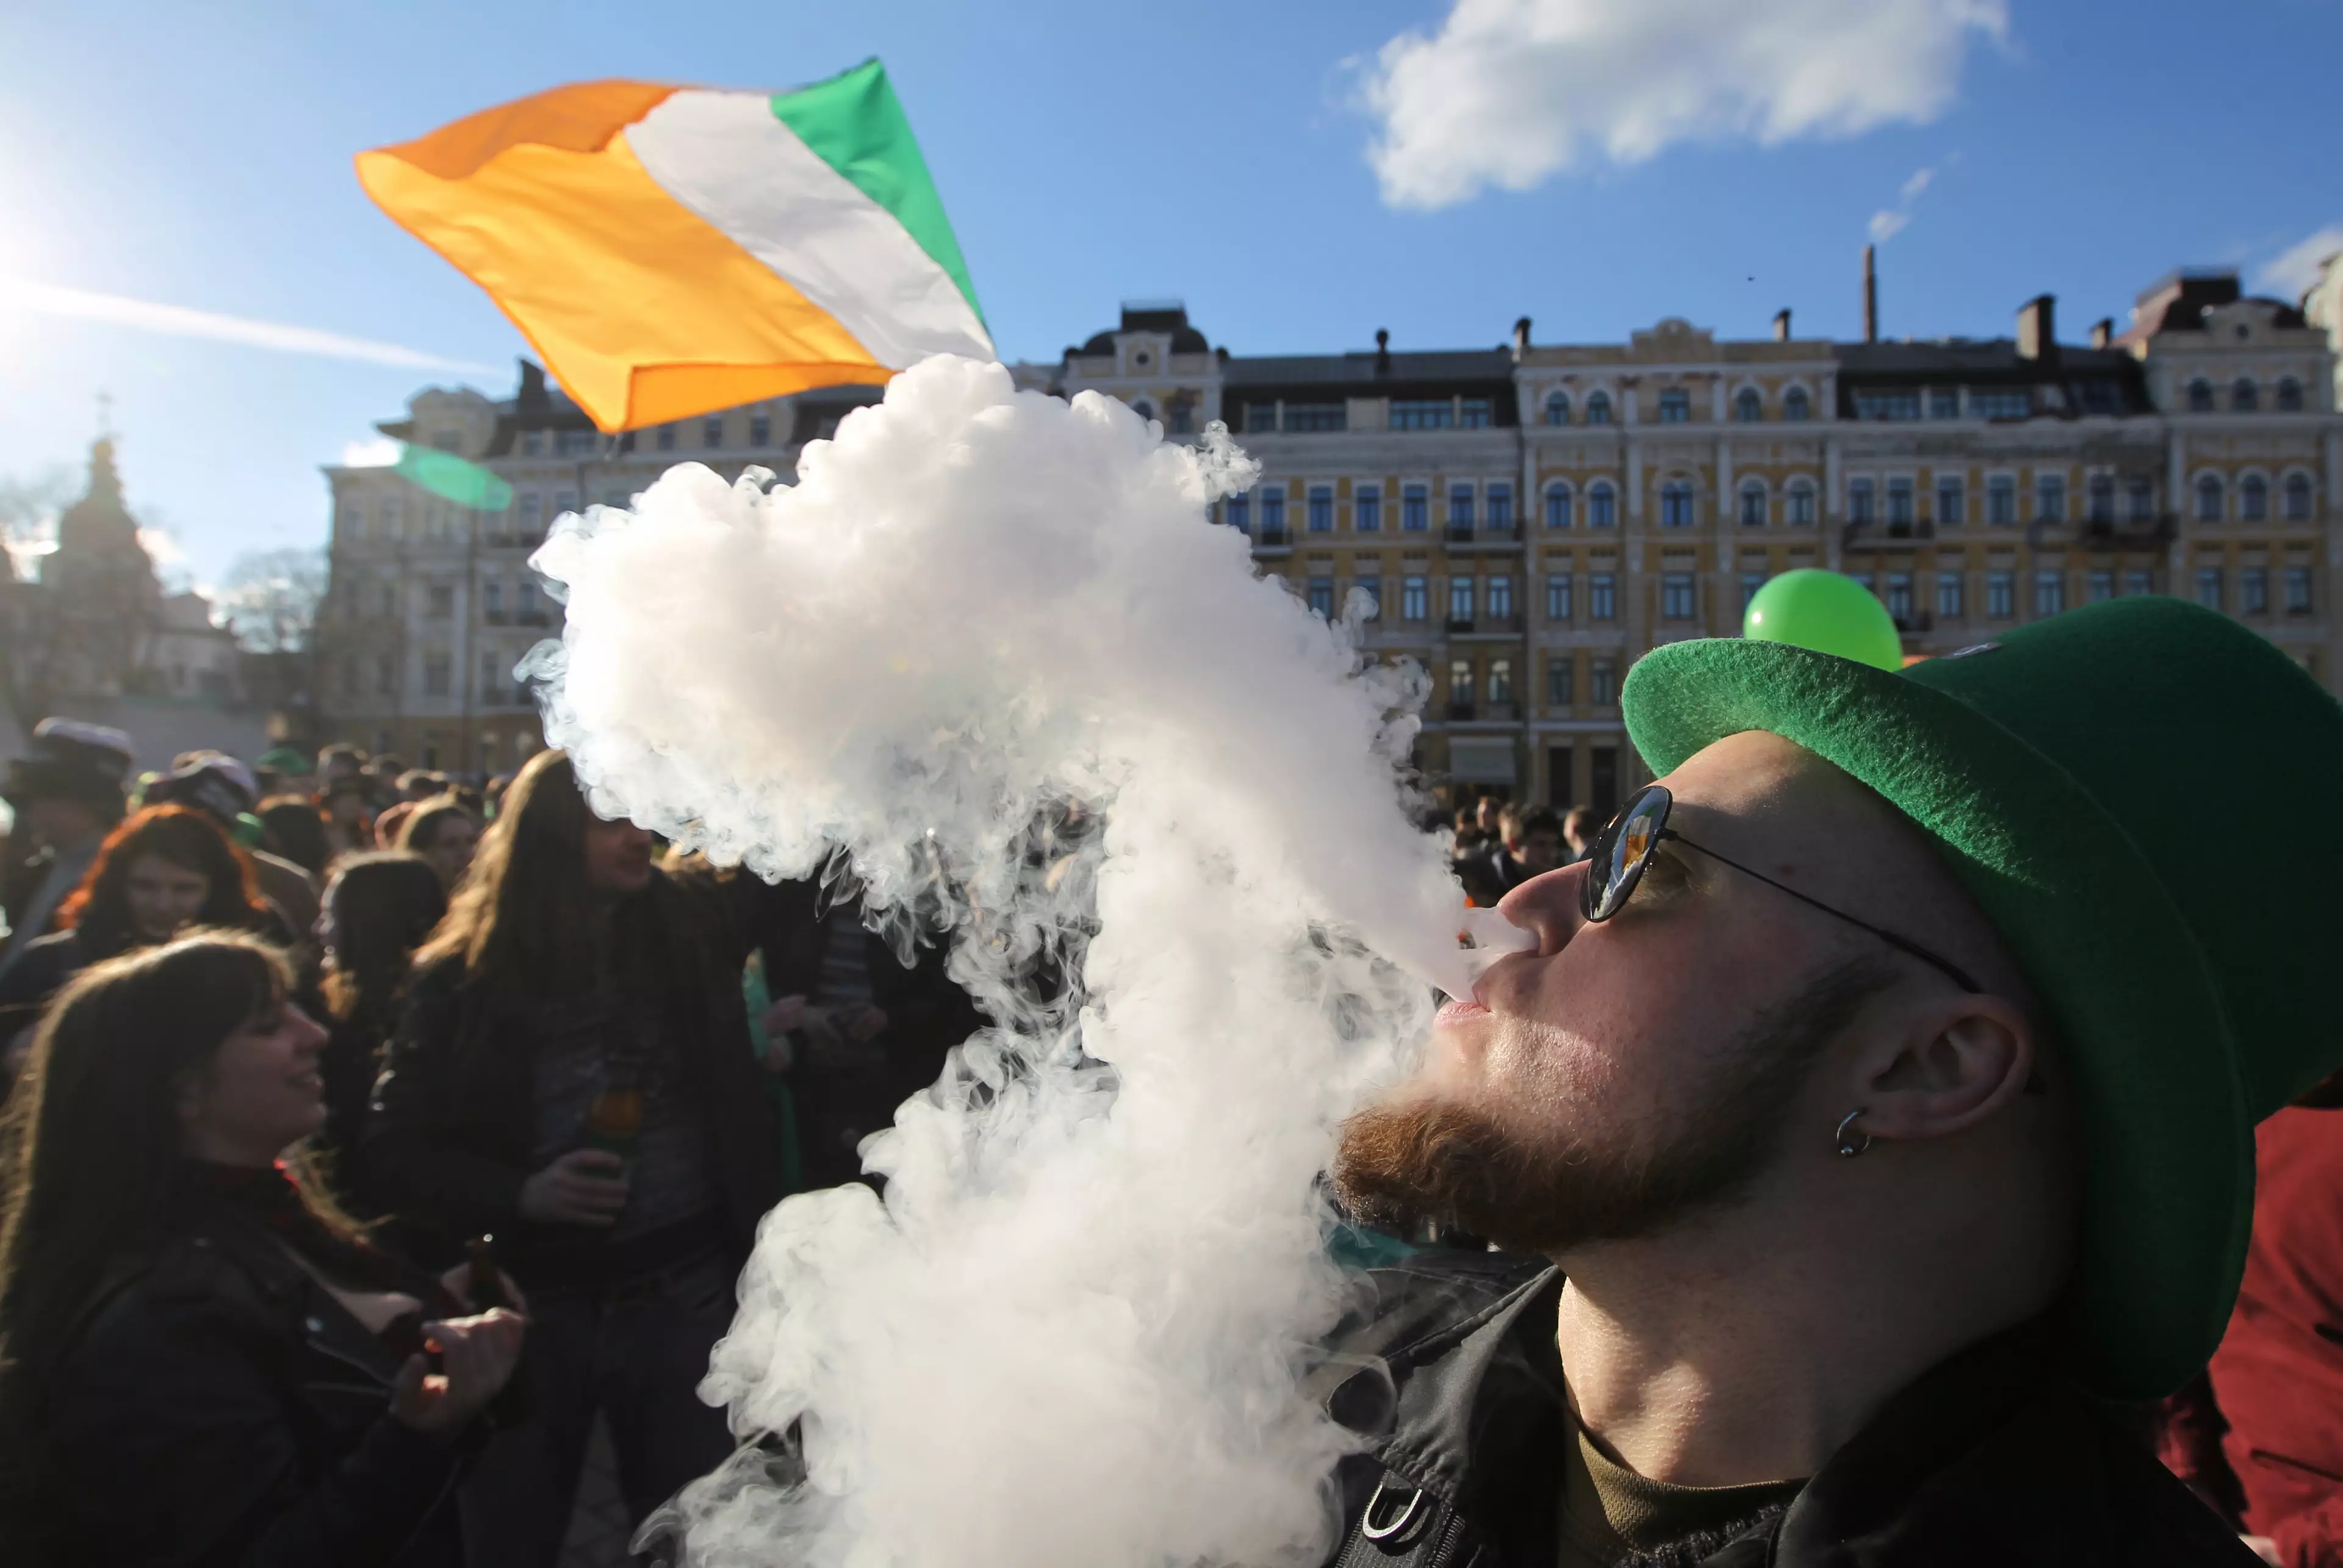 St Patrick's Day was celebrated at parades across the world.